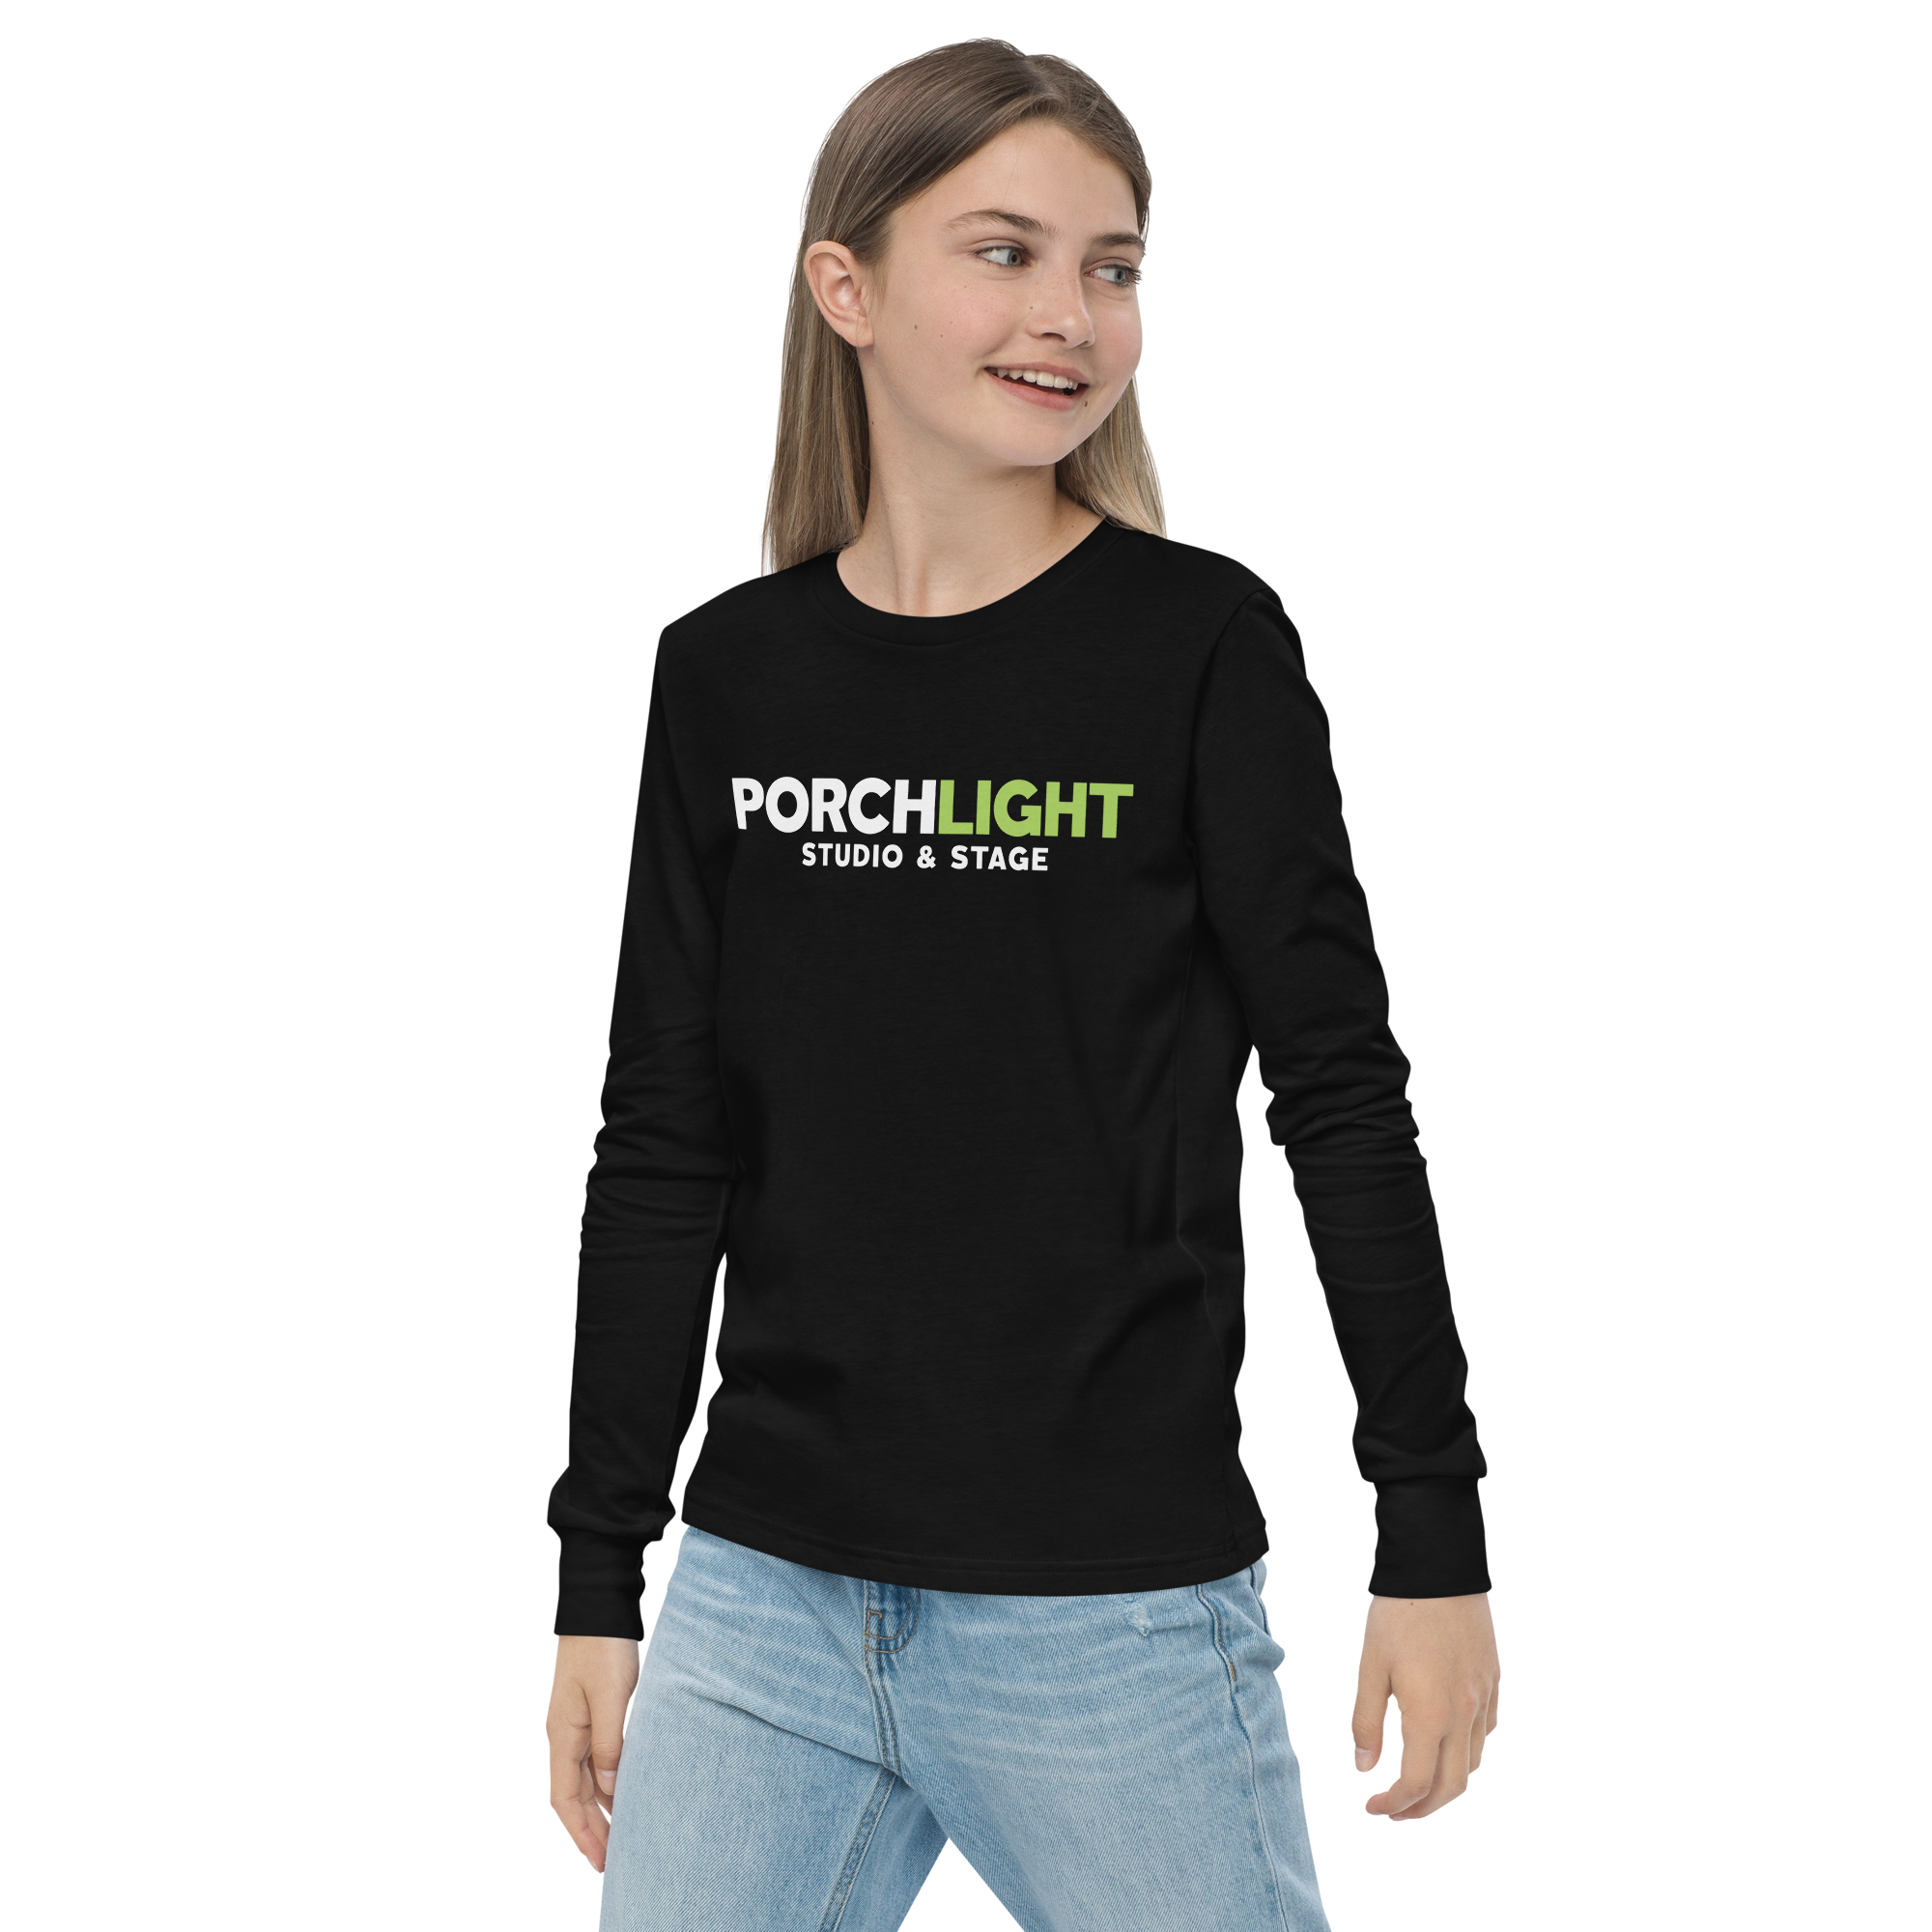 Youth Long Sleeve Porch Light Tee